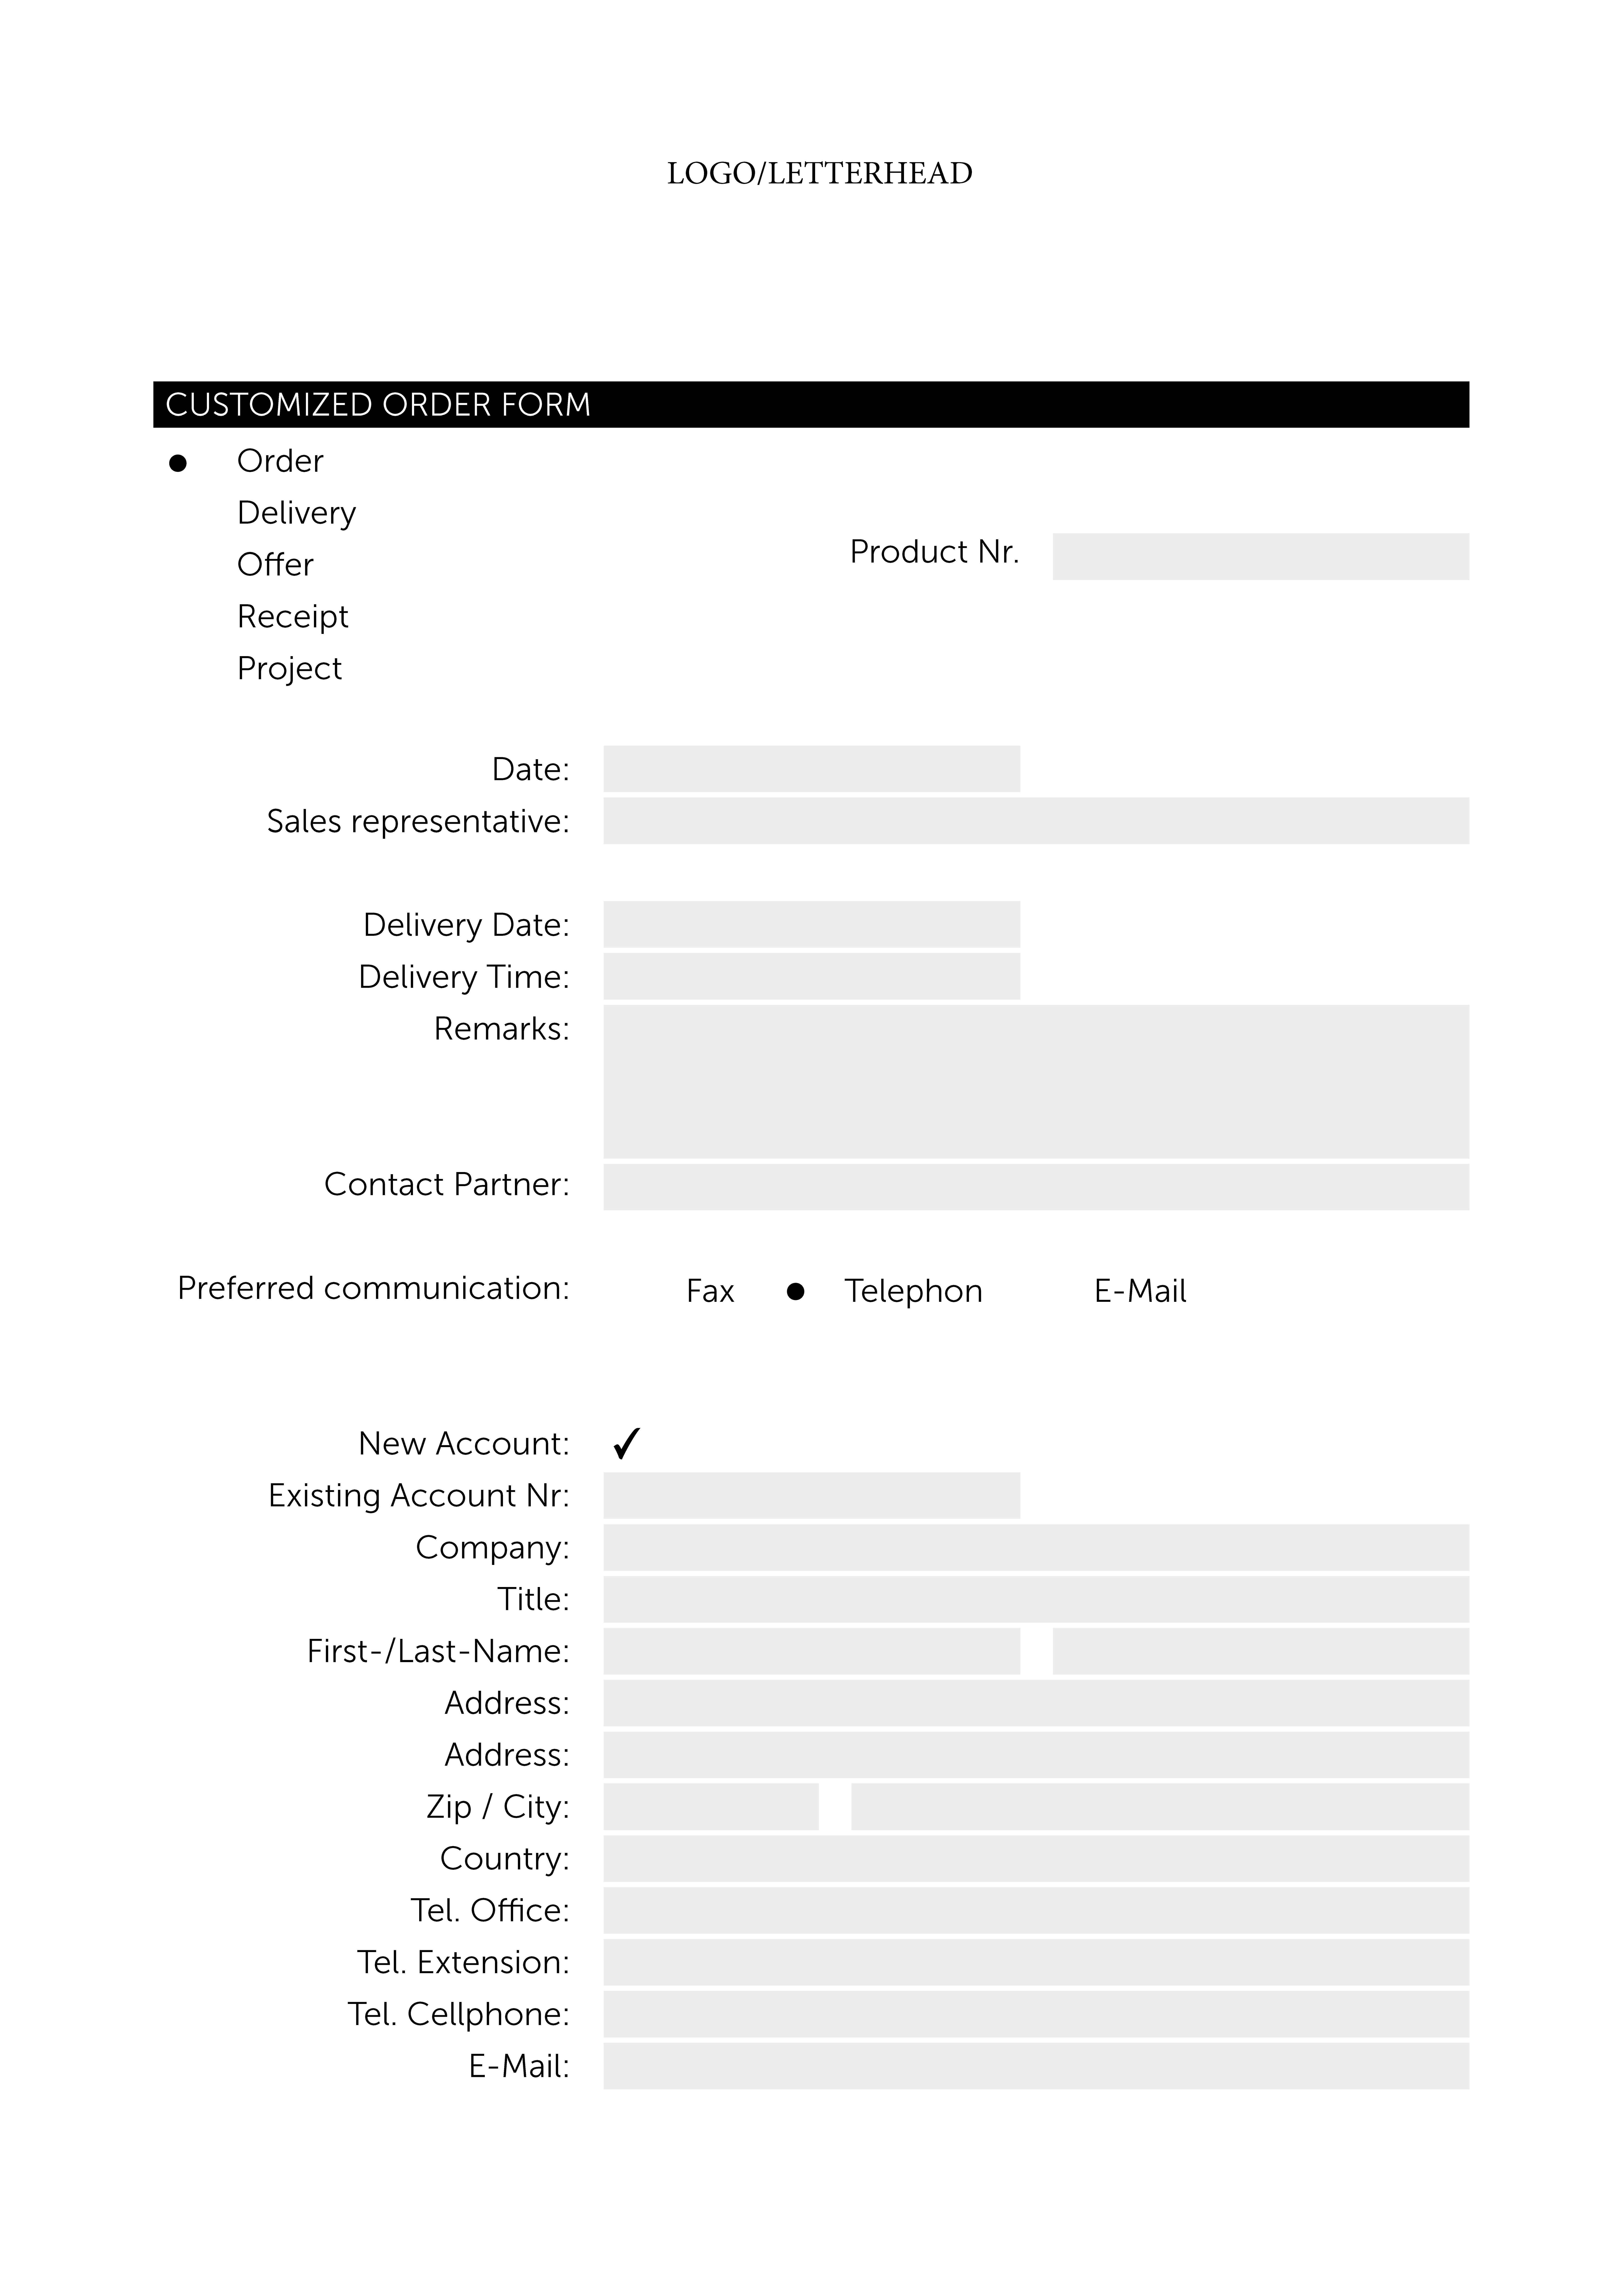 delivery order template